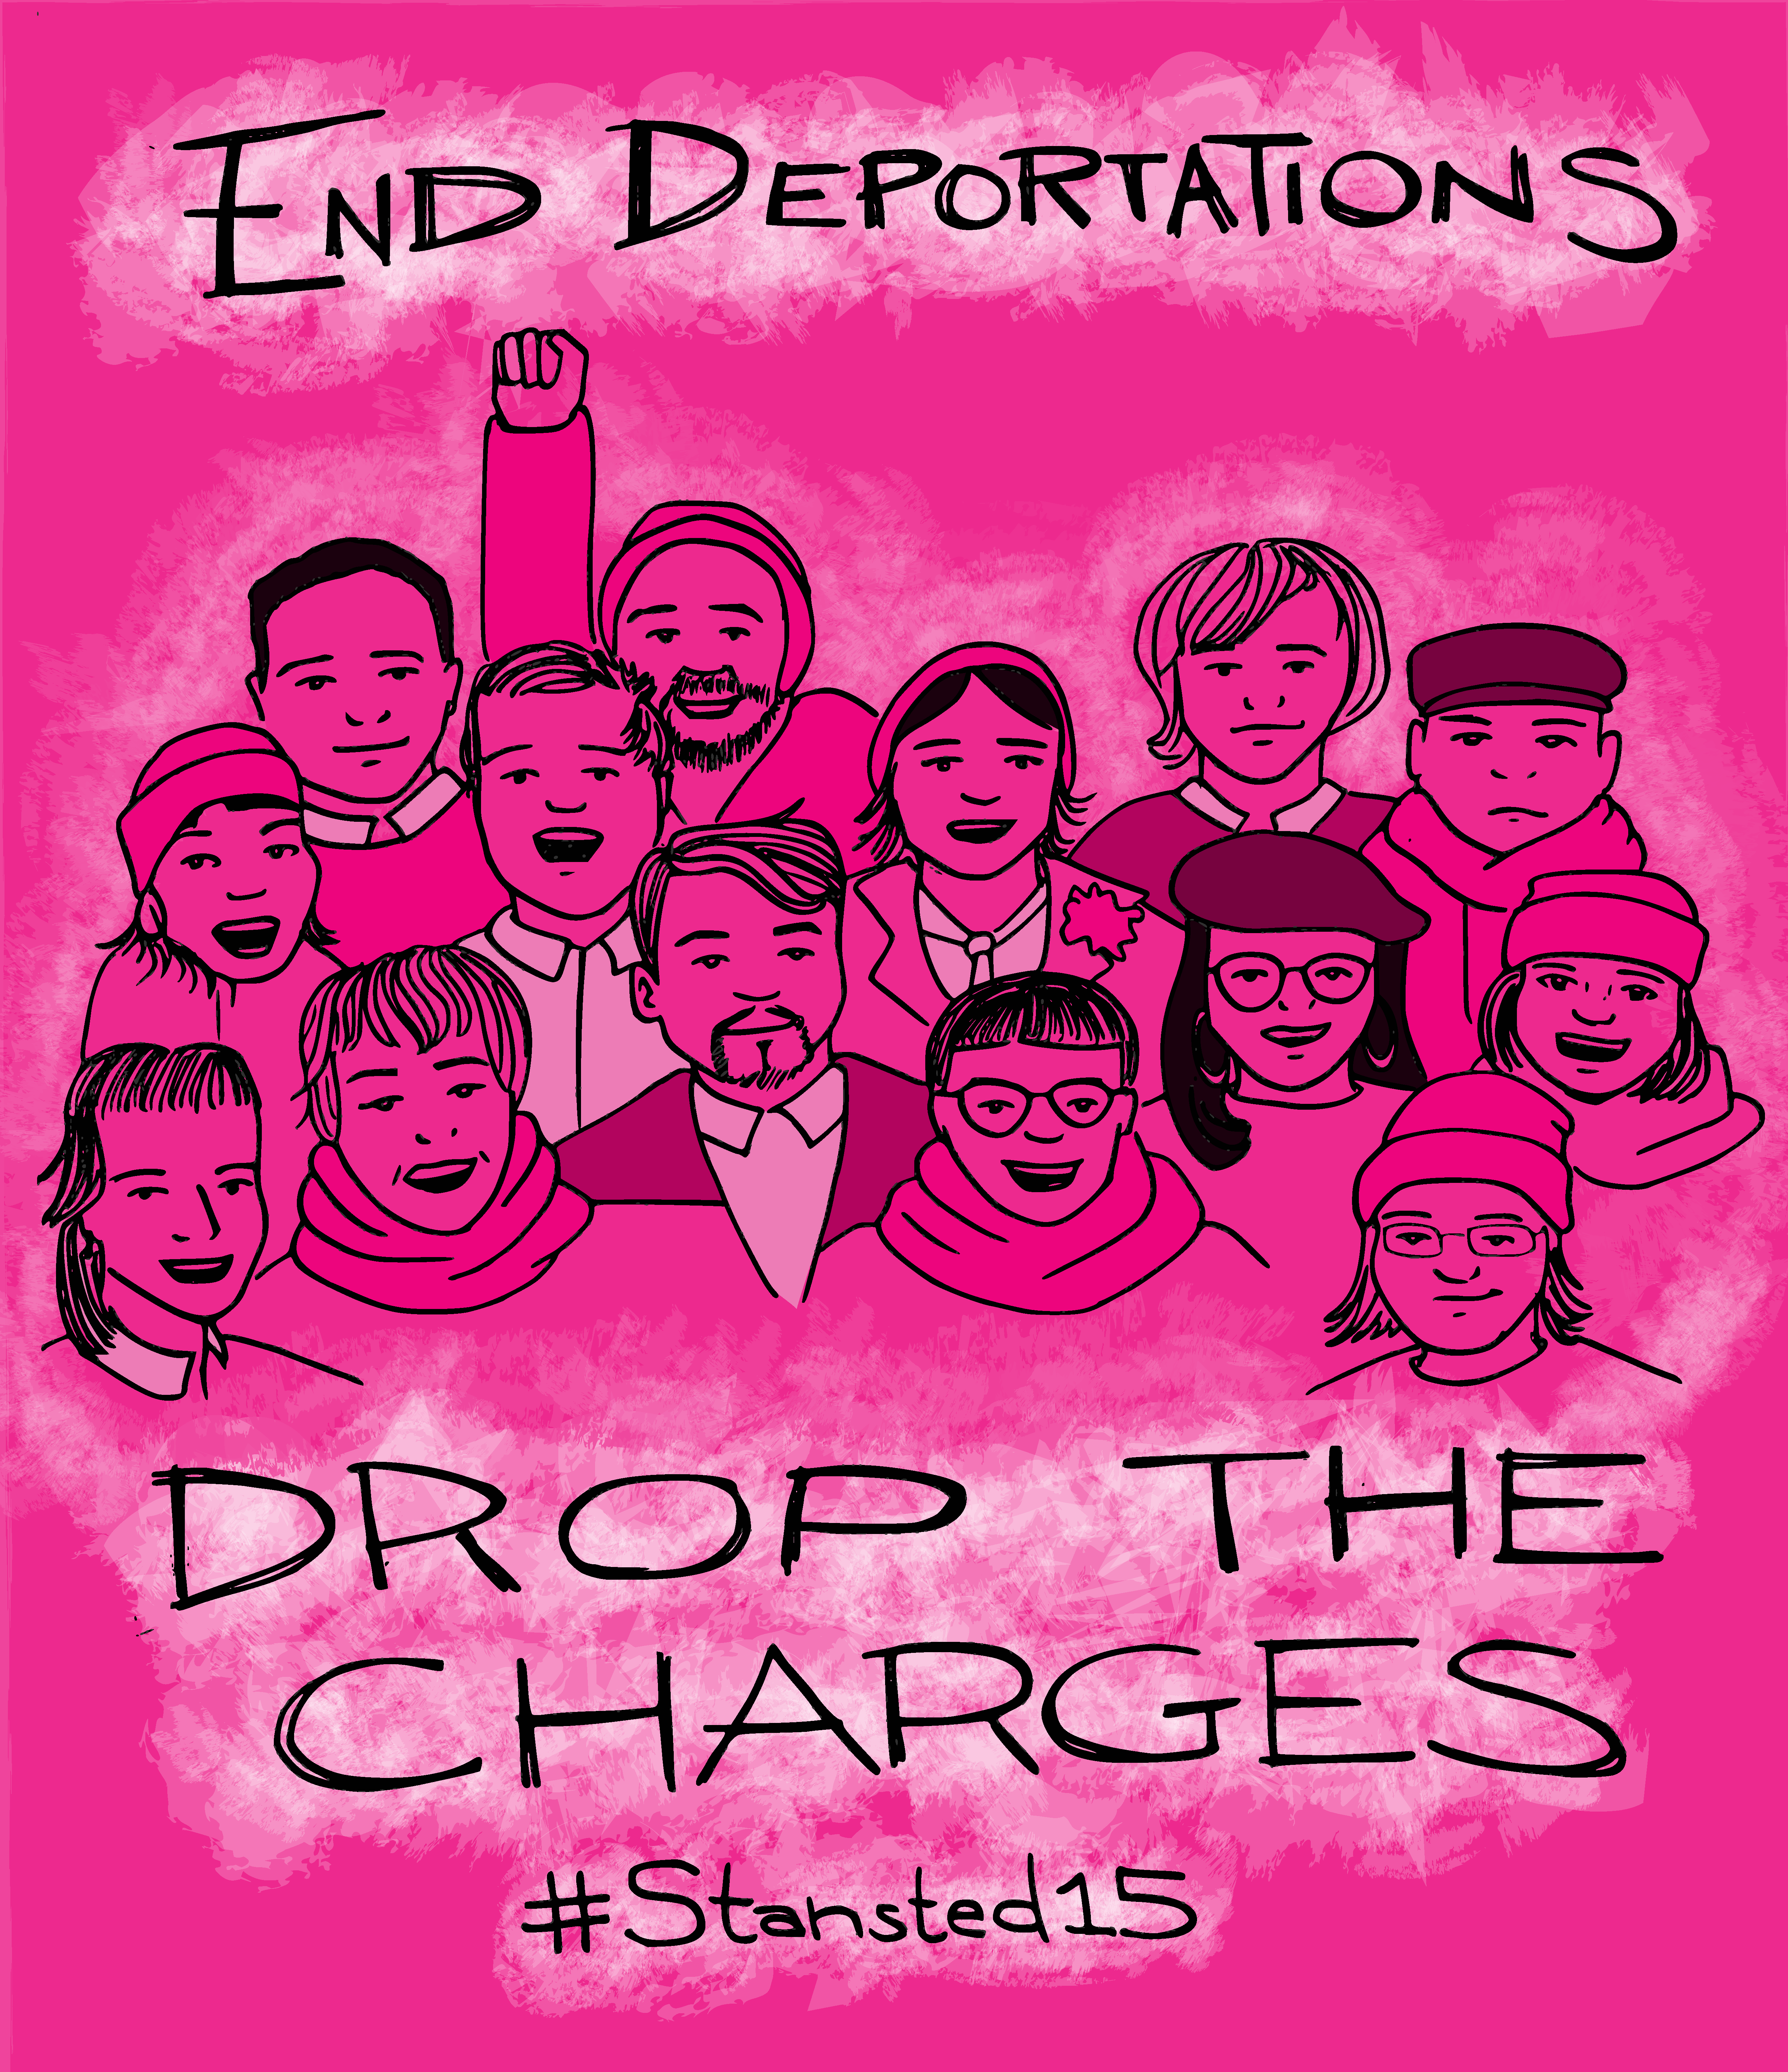 A pink-coloured graphic that has drawings of a group of people and text saying 'End Deportations', 'Drop the charges', and '#Stansted15'